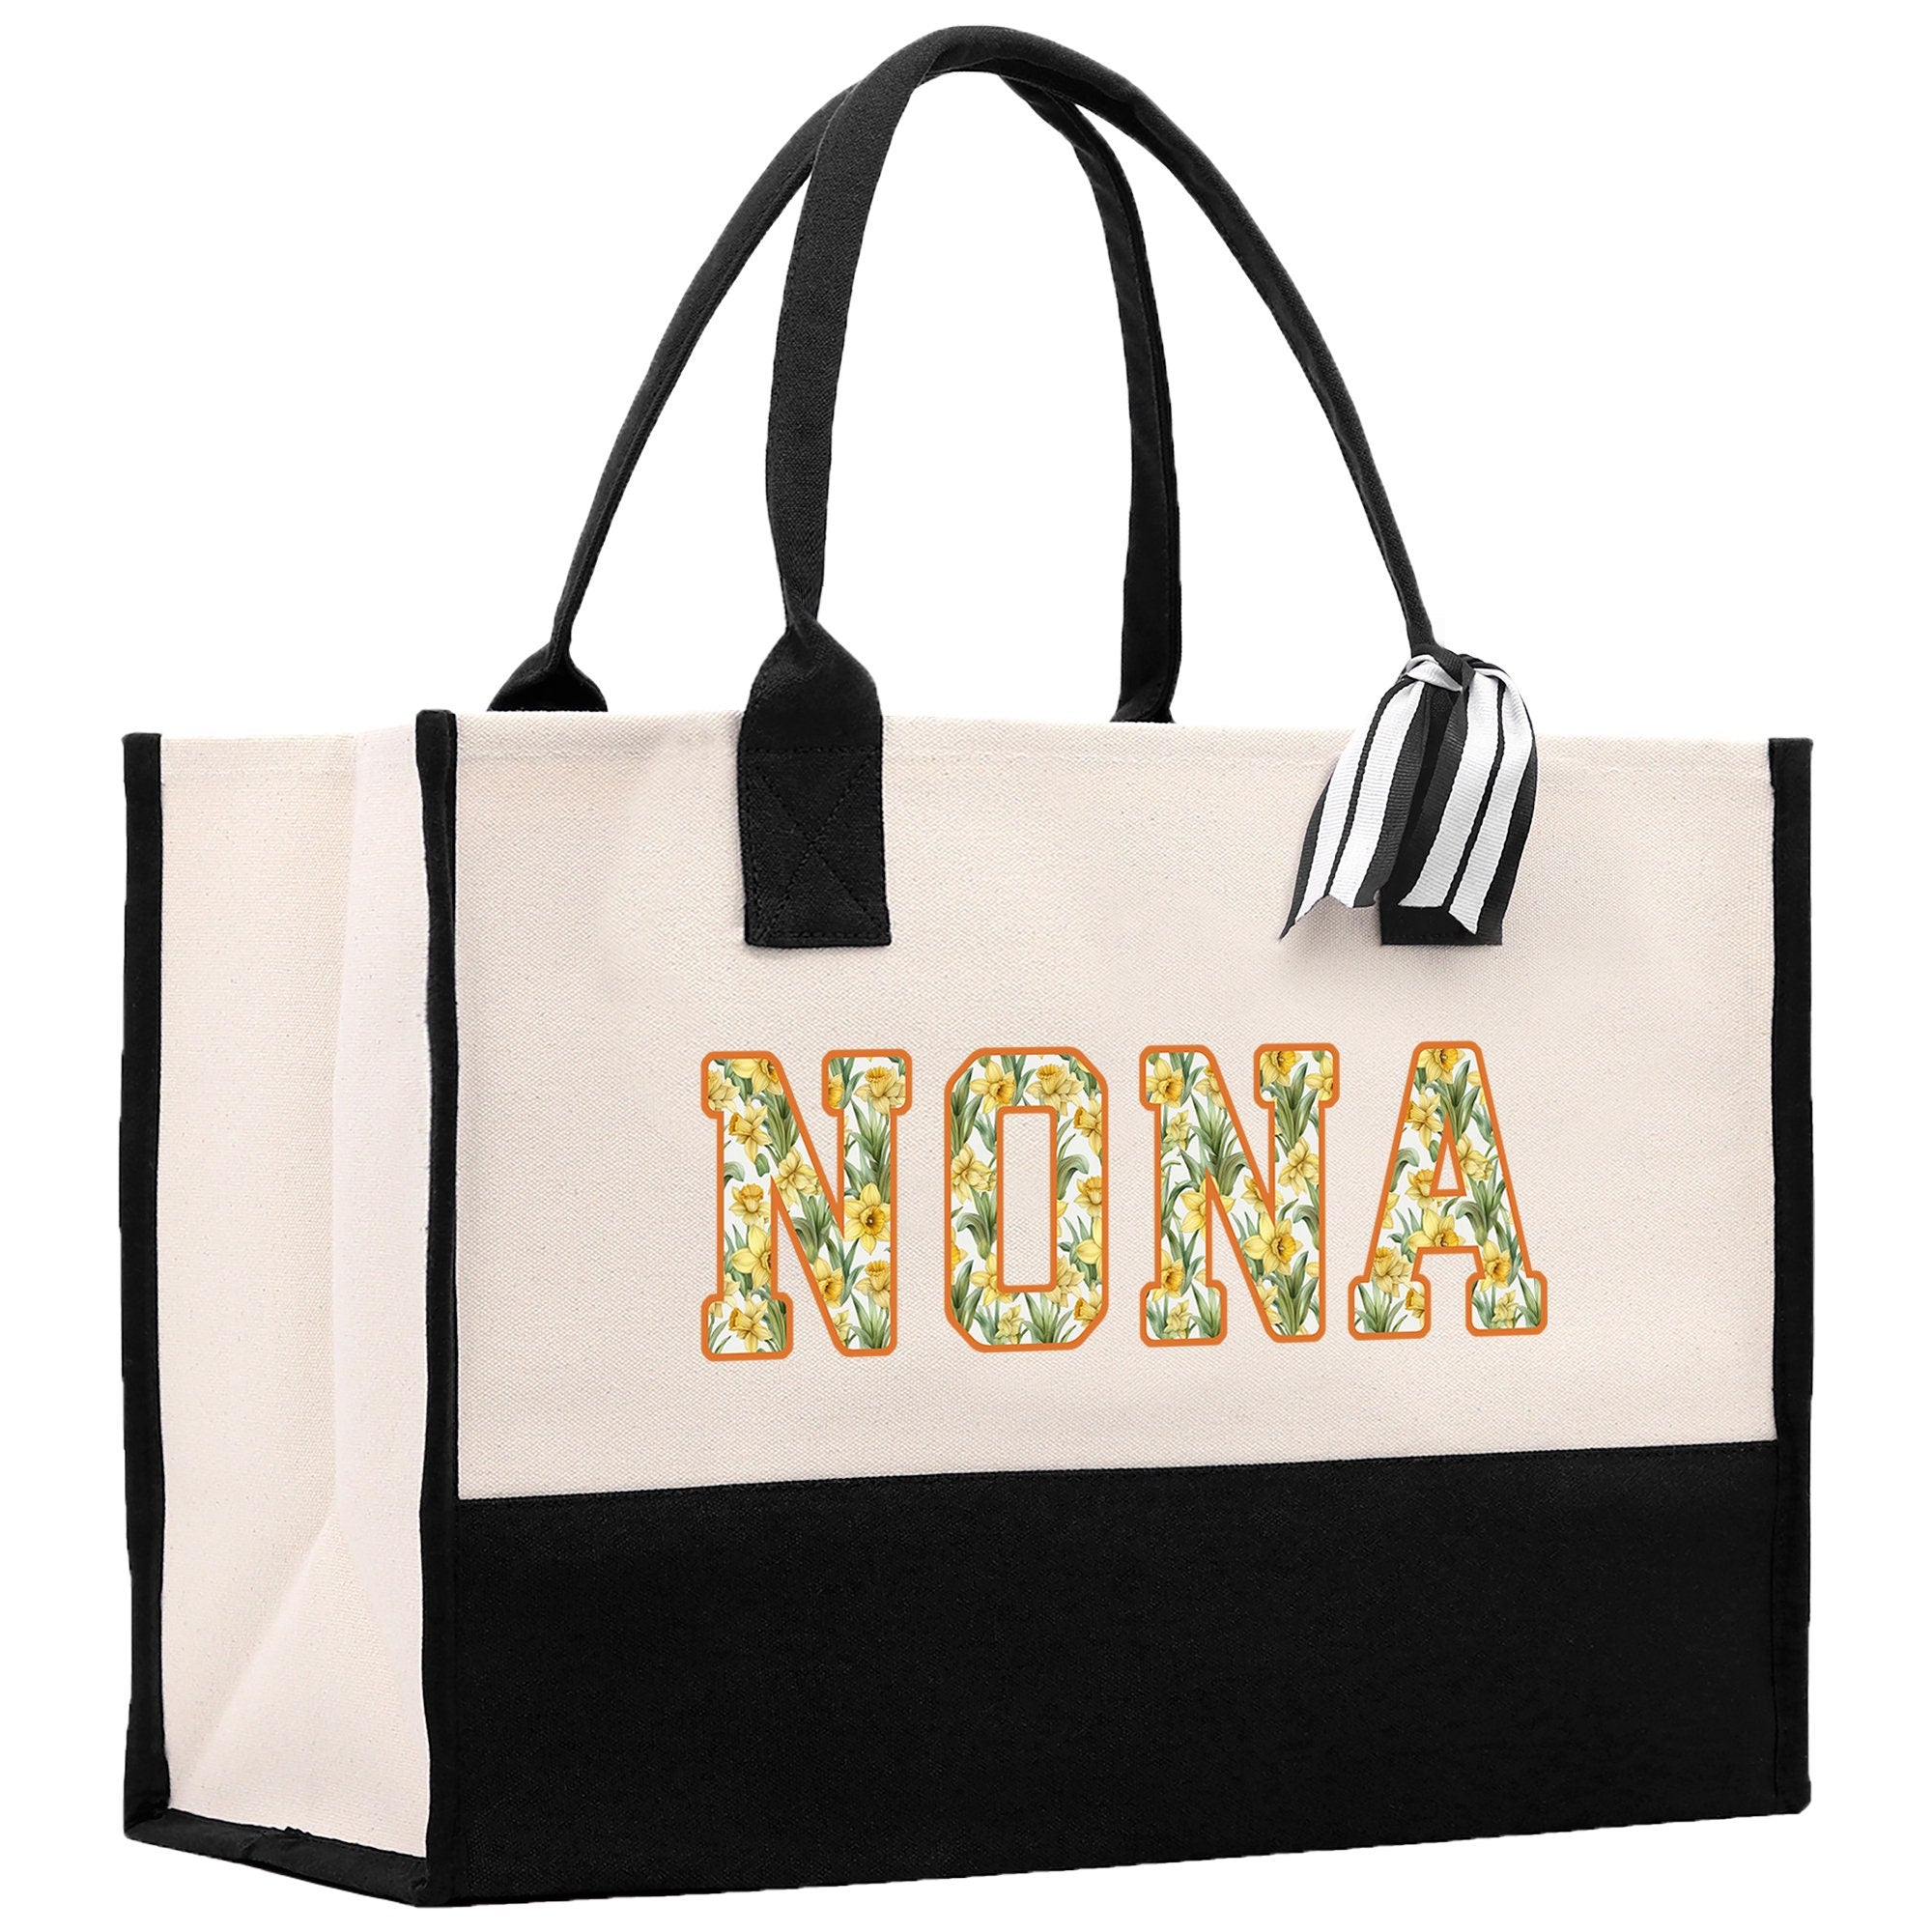 a black and white bag with the word nona printed on it